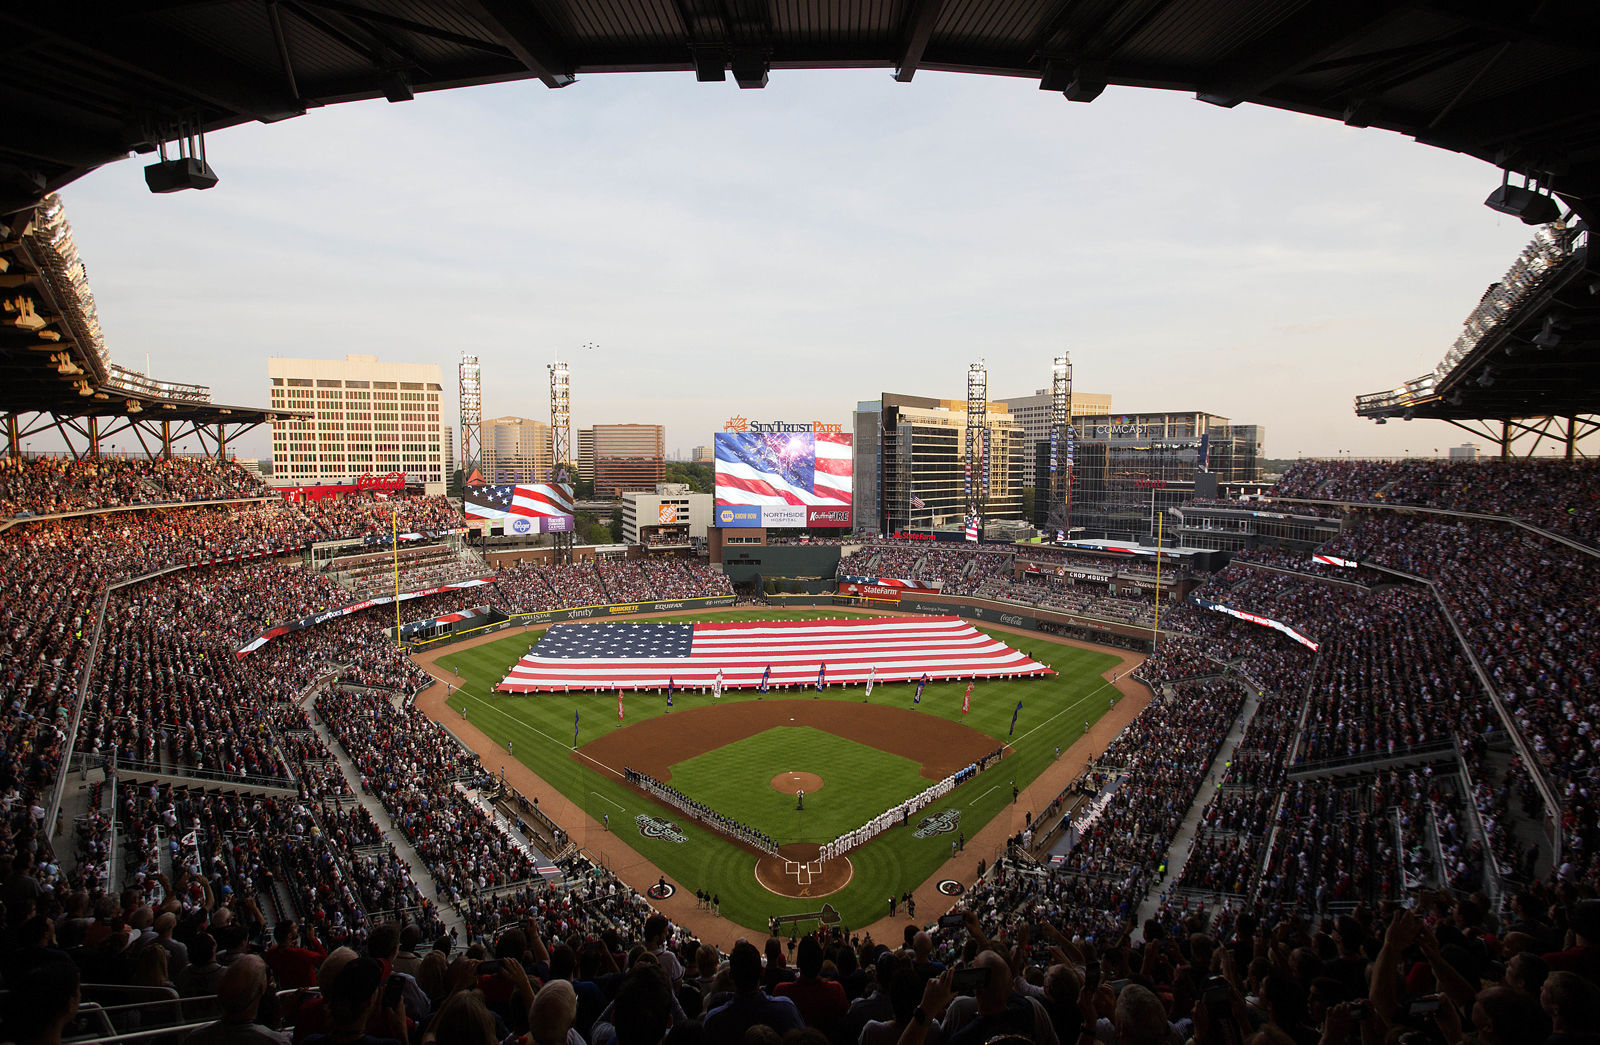 SunTrust Park, the home of the Atlanta Braves, is the newest stadium in baseball but it is also the second cheapest. The cost to watch a Braves game in Atlanta is $51. File. (AP Photo/David Goldman)